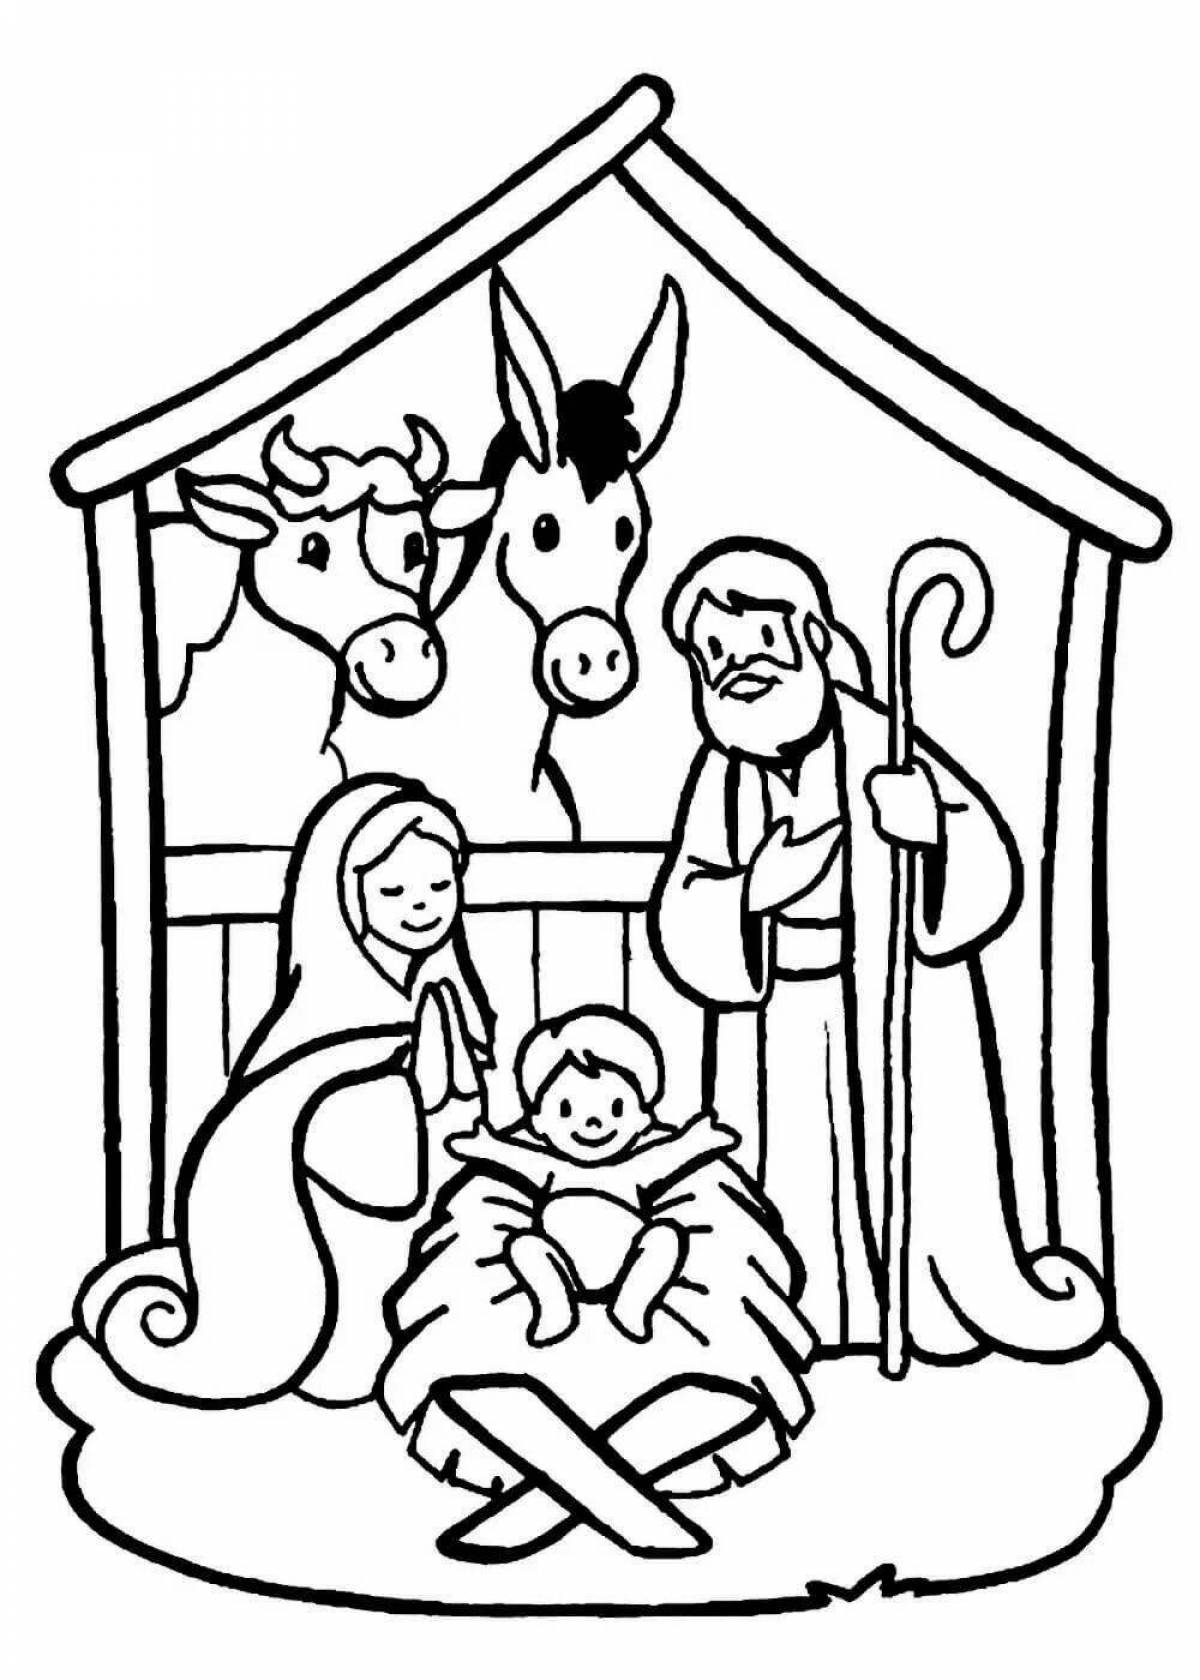 Grand coloring page children's christmas